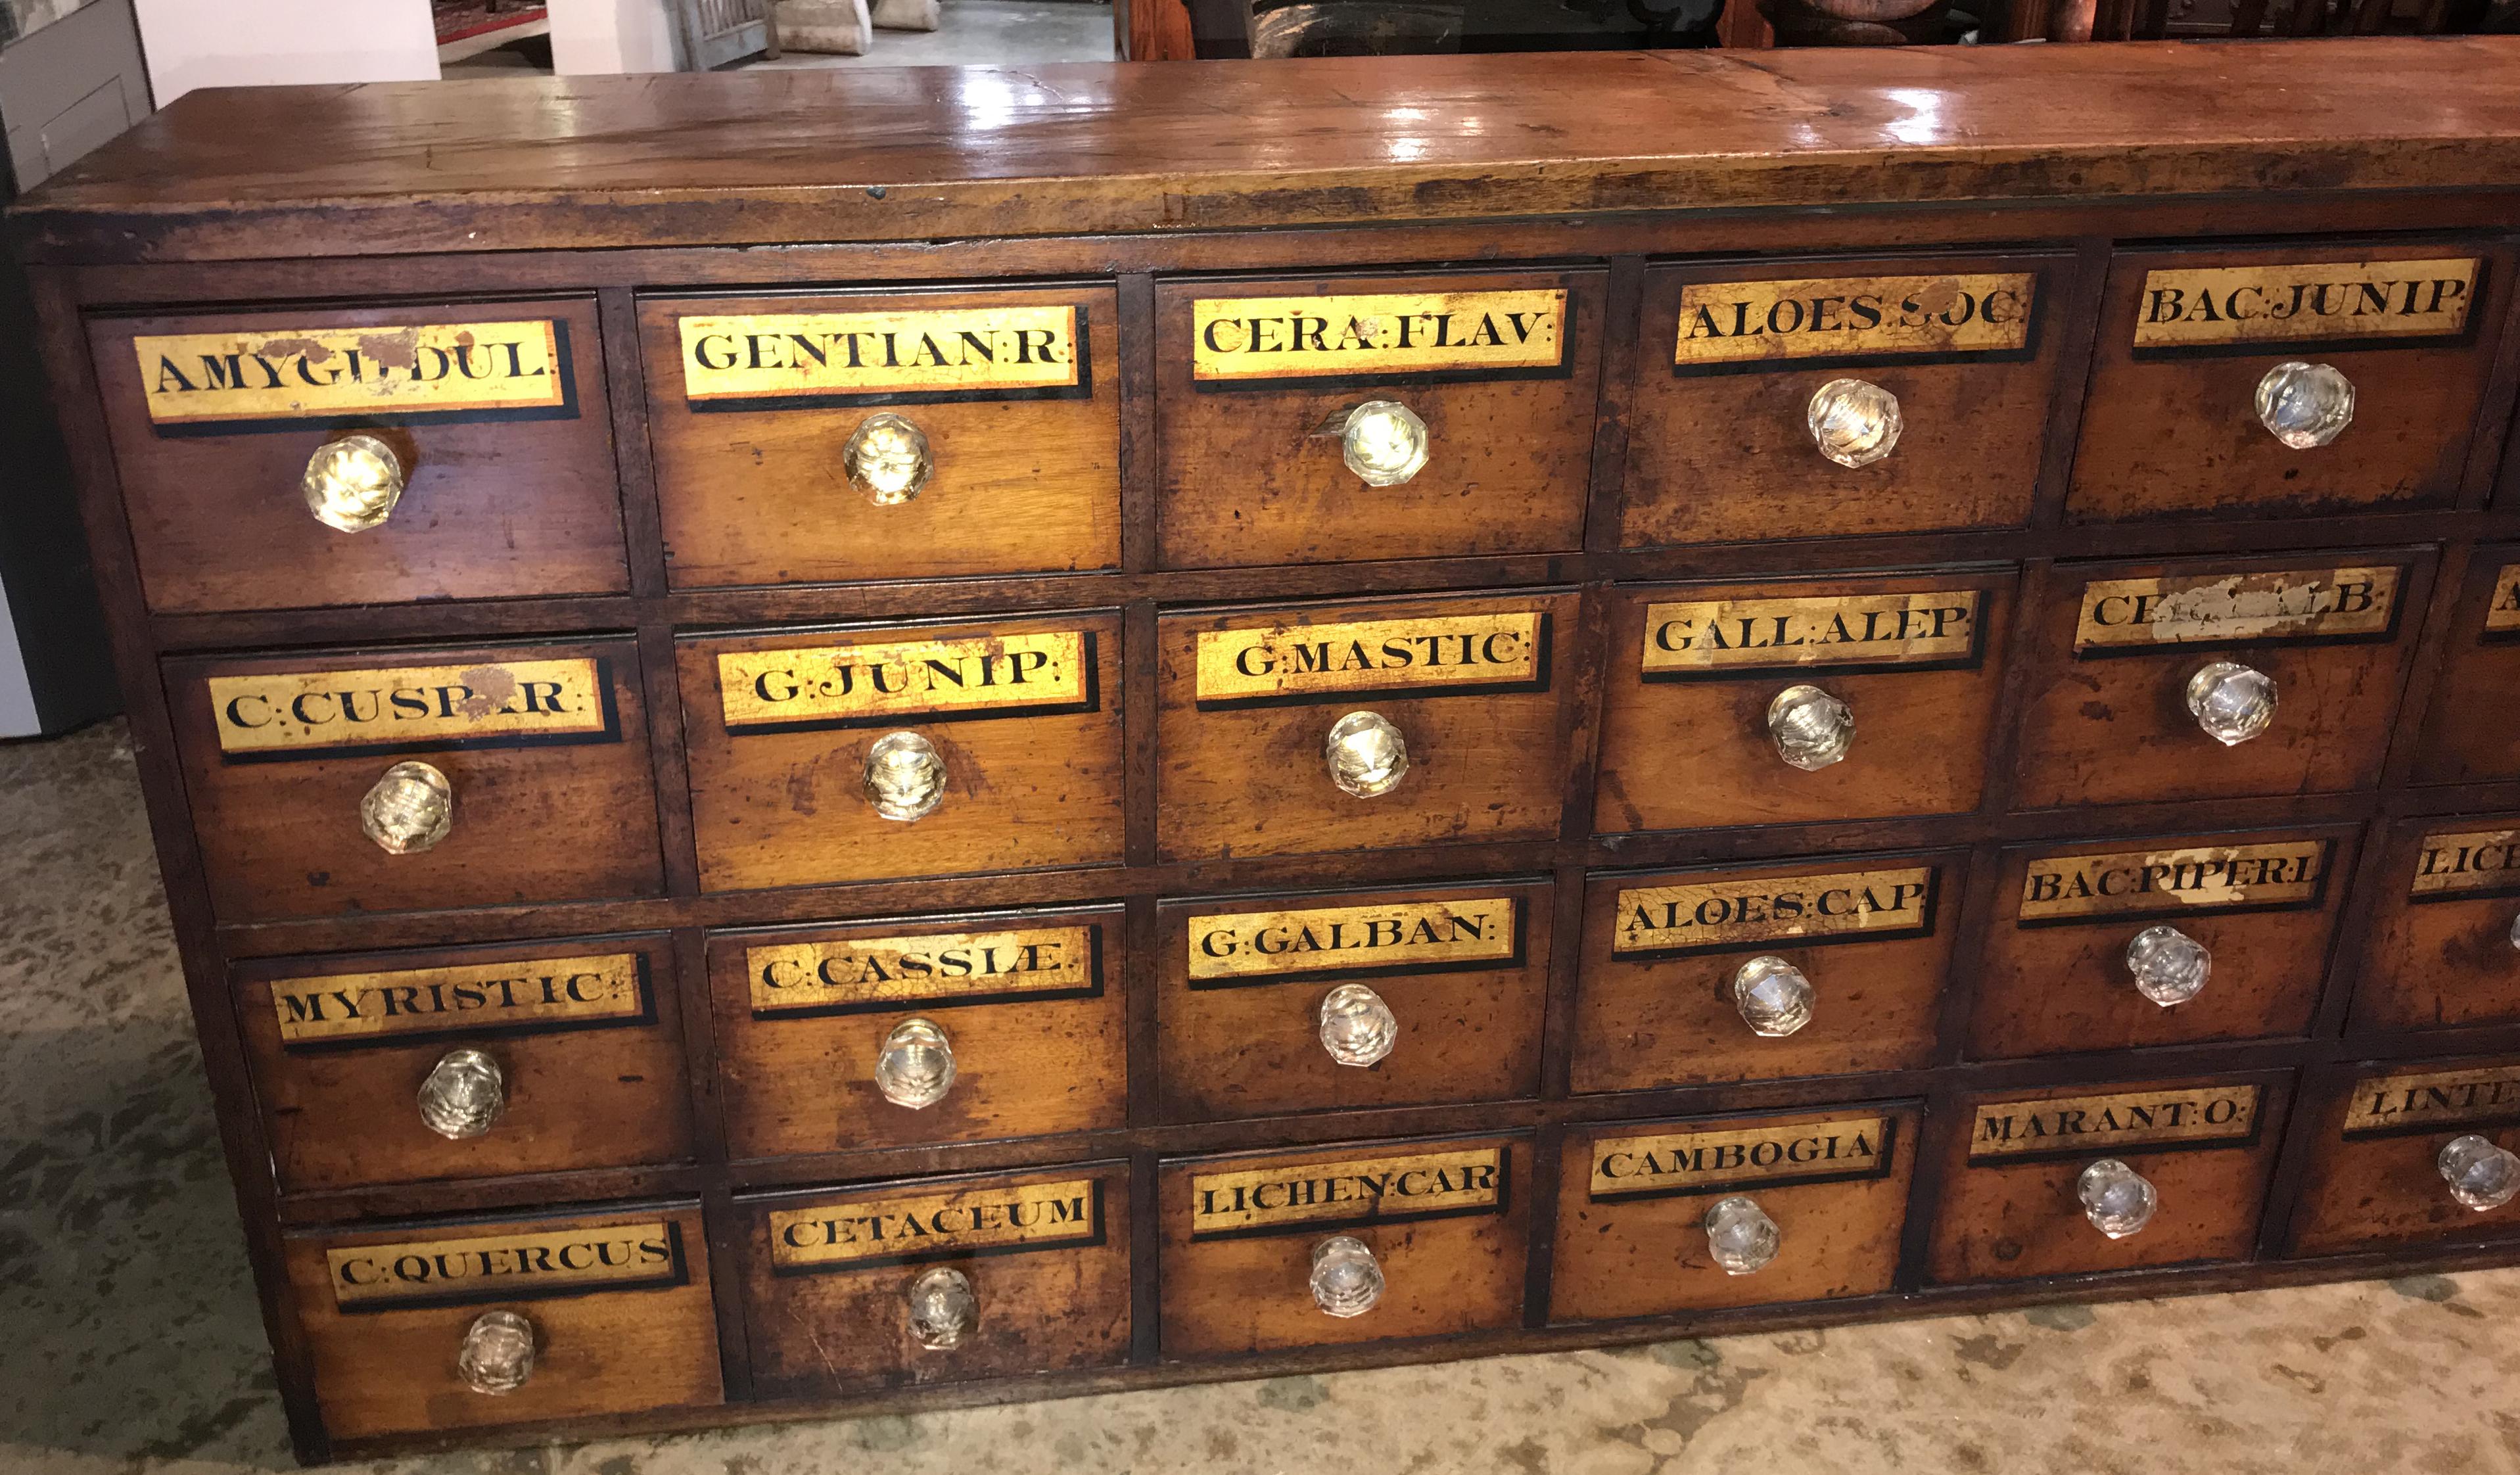 A fine wooden 32-drawer chemist apothecary chest with glass knobs, each drawer labeled with black on gold with names of chemicals or potions used at the time. Some hand inscribed labels can be found on the interior of the drawers. There is no back